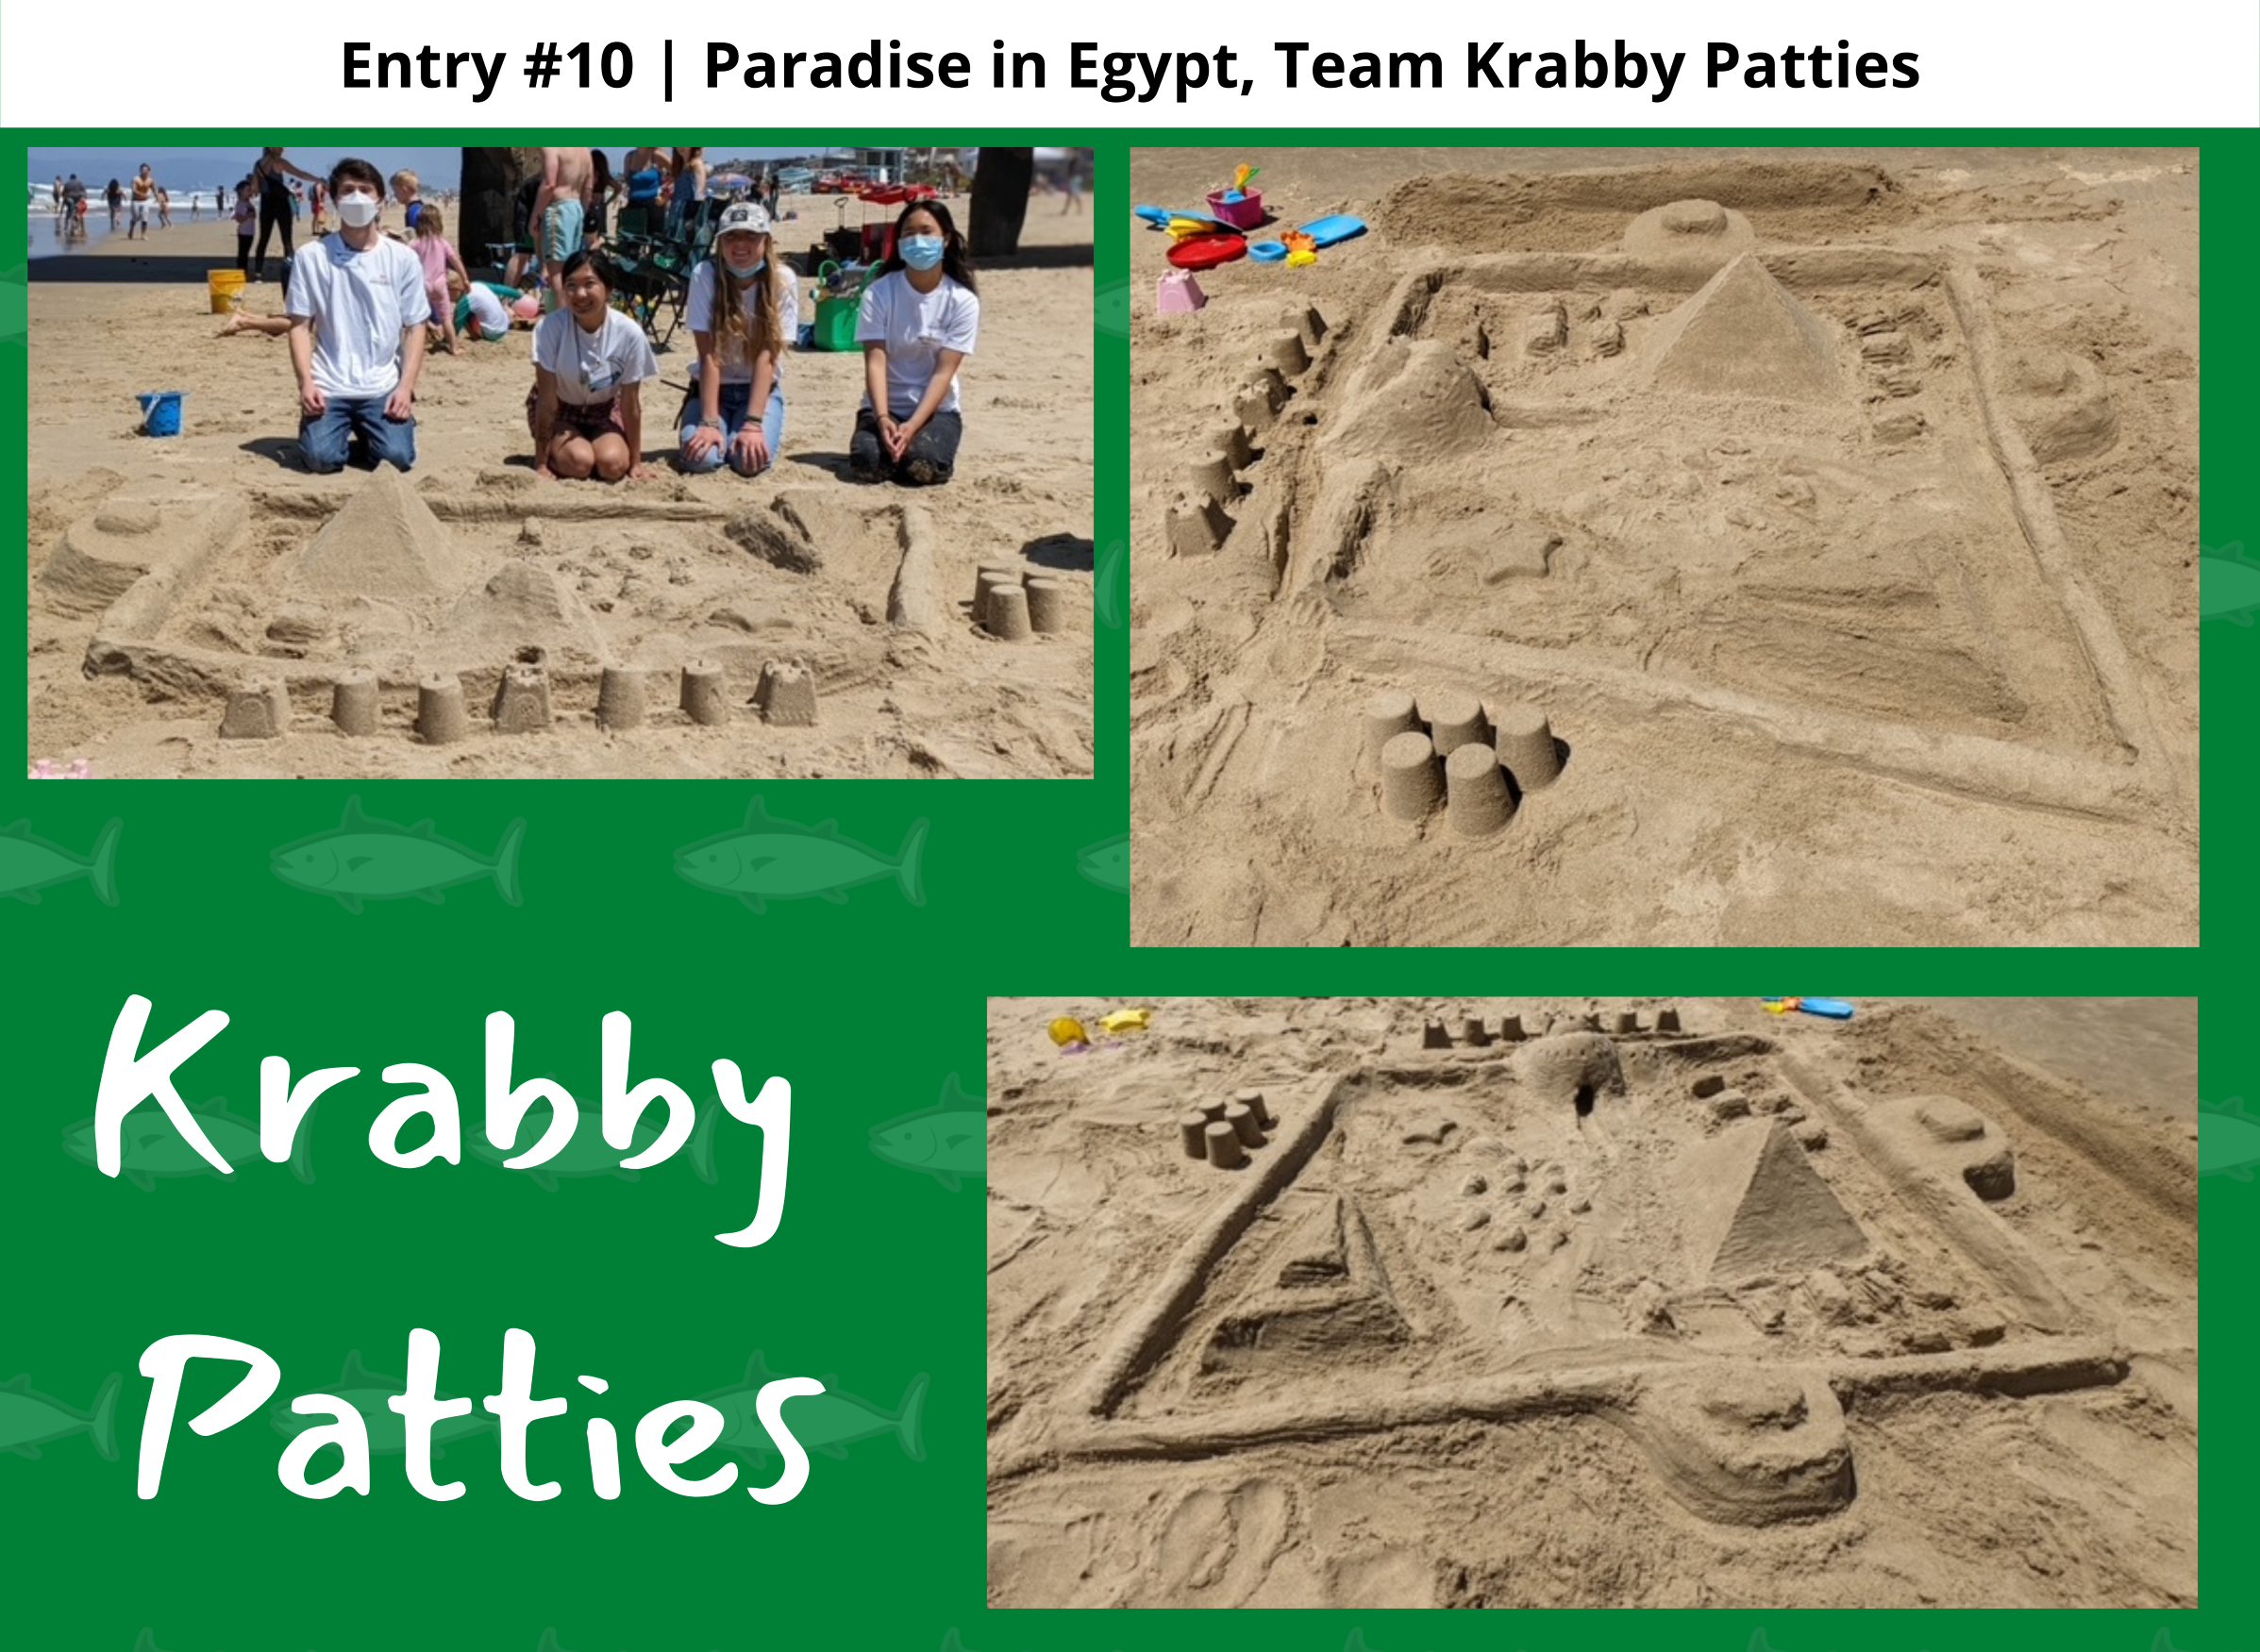 Entry #10 | Paradise in Egypt